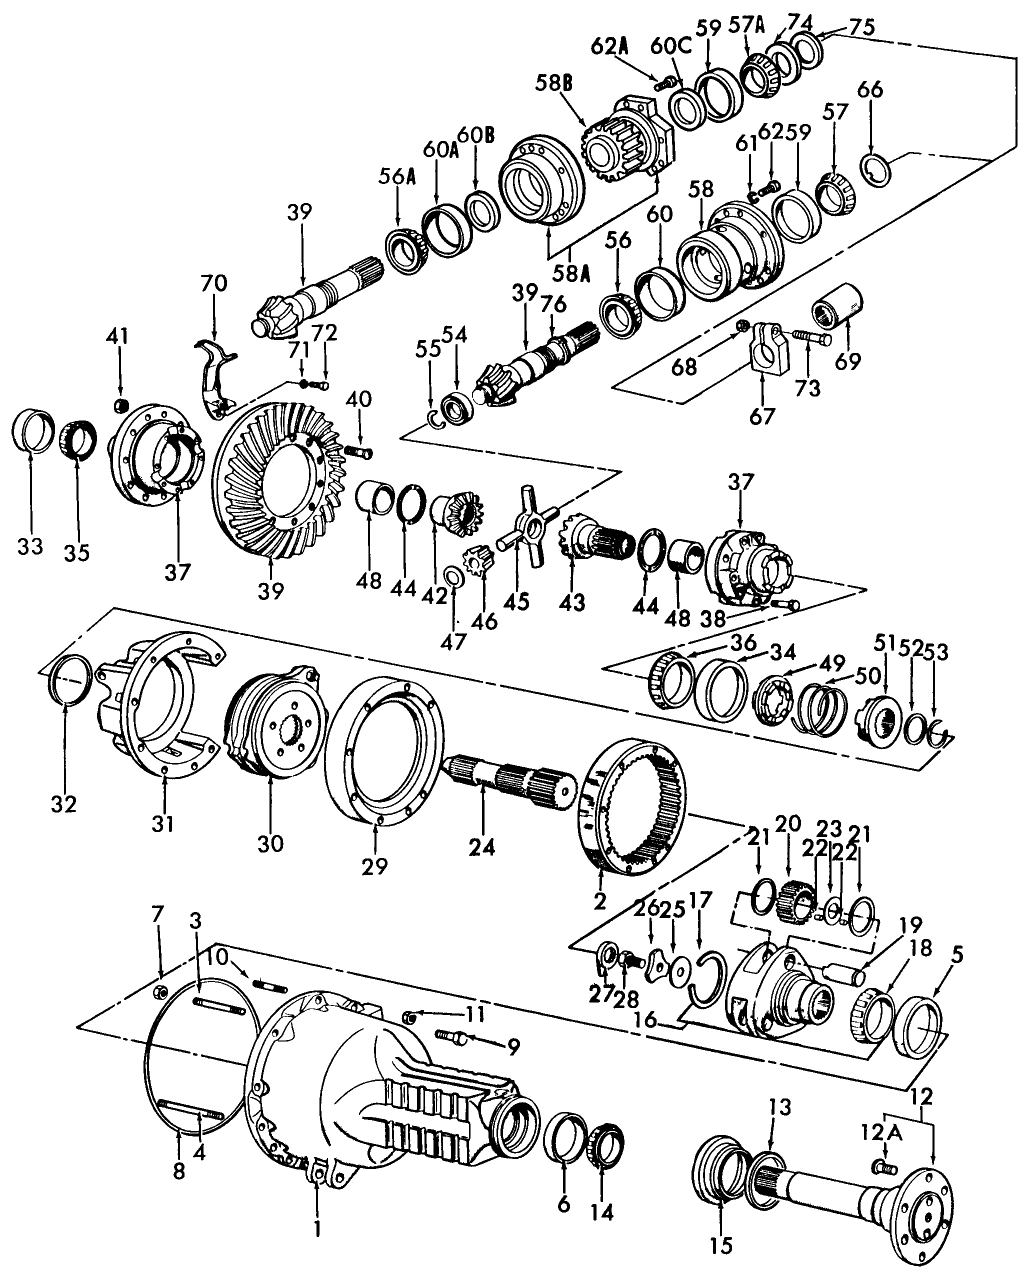 04A01 REAR AXLE DIFFERENTIAL & RELATED PARTS